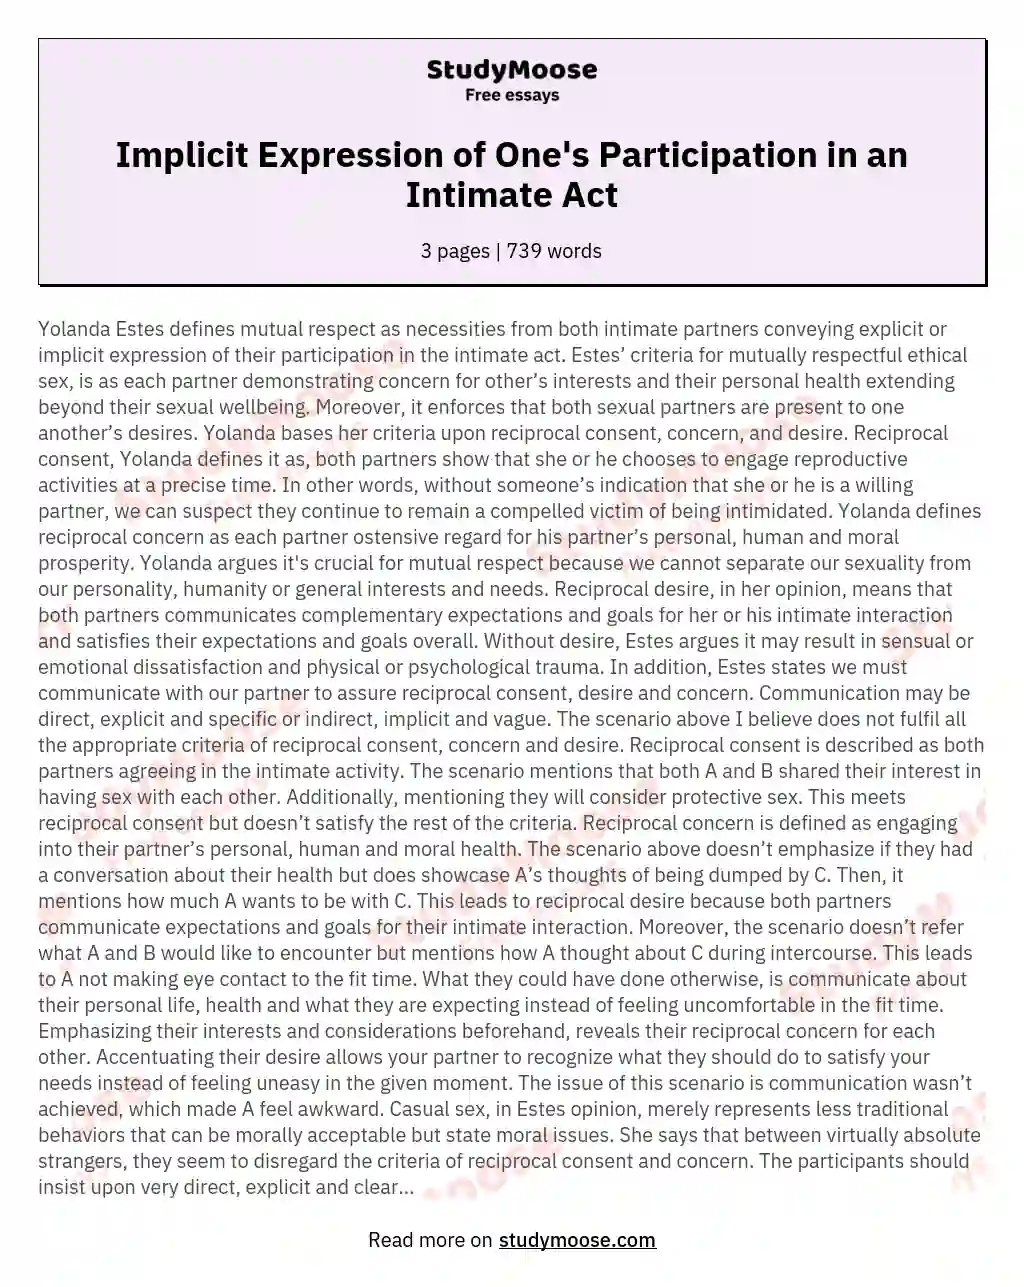 Implicit Expression of One's Participation in an Intimate Act essay